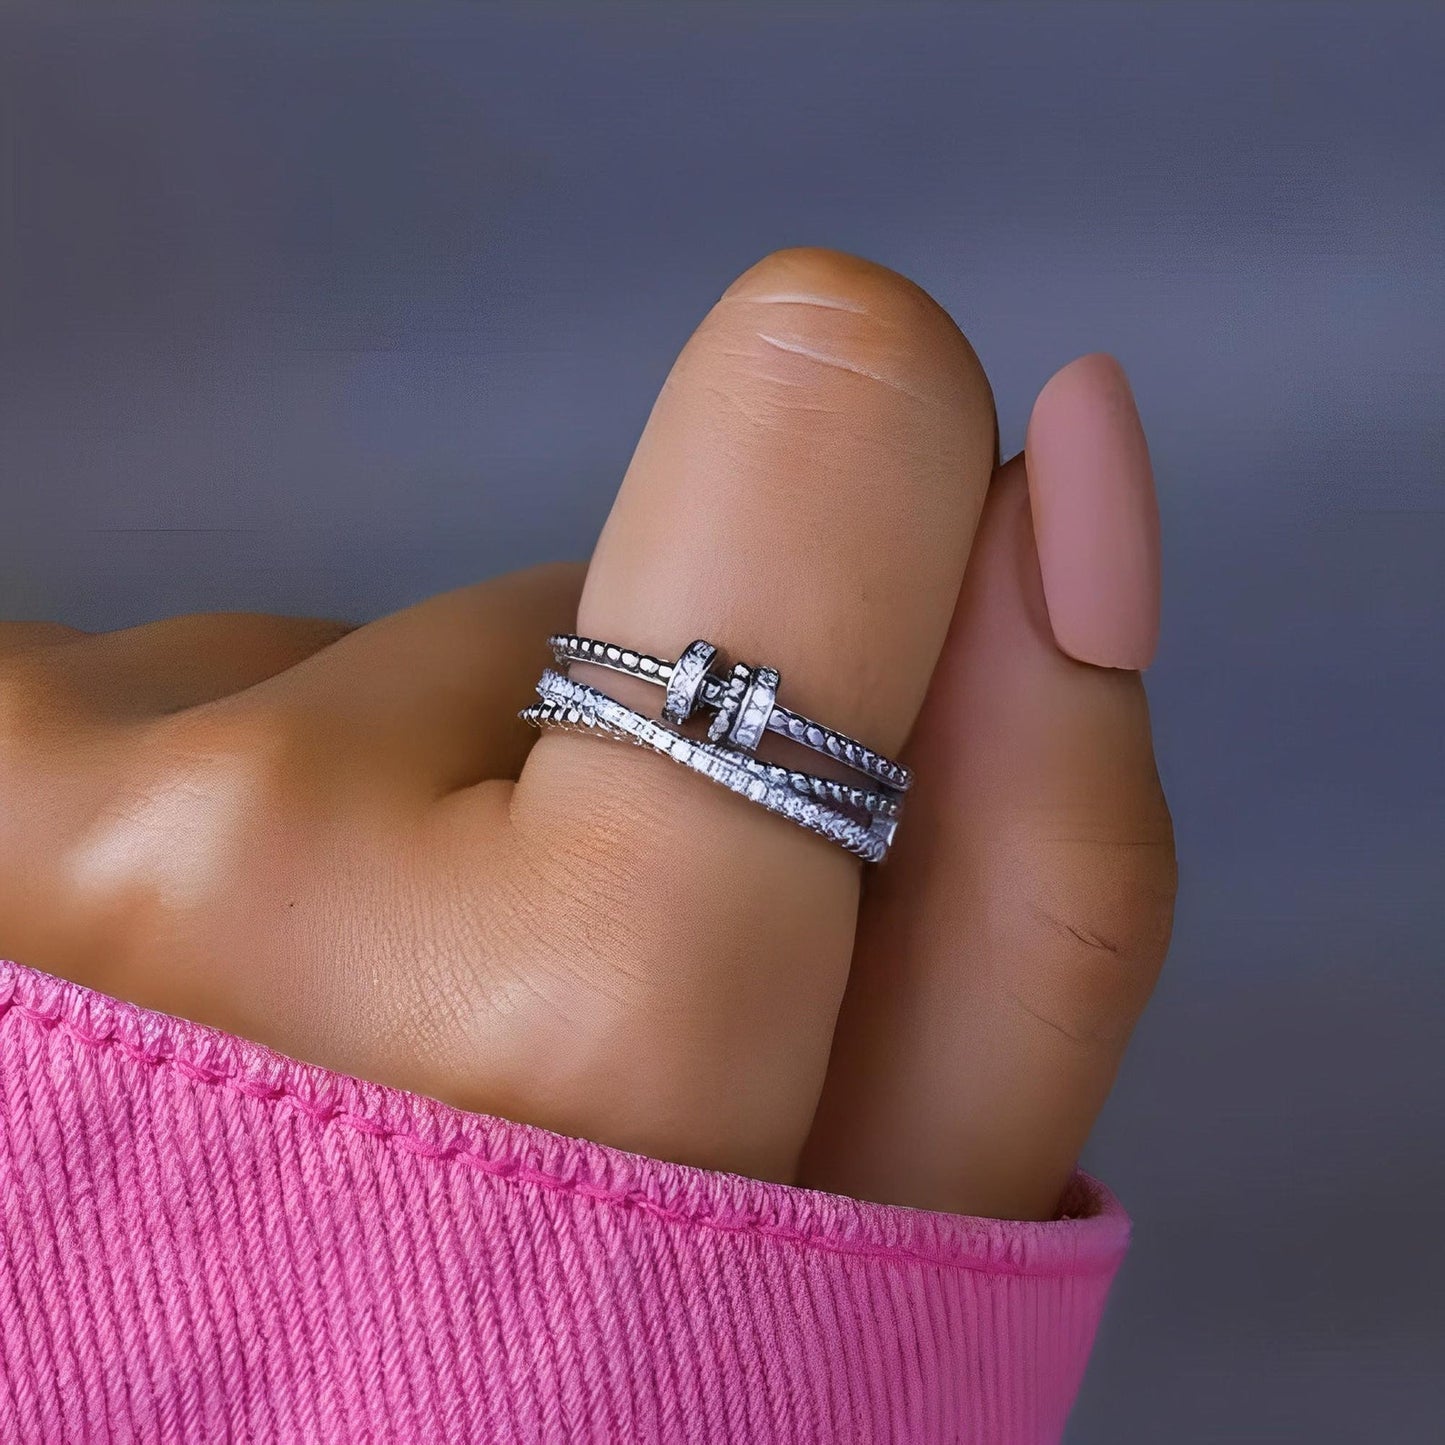 Ring™ "For my daughter"